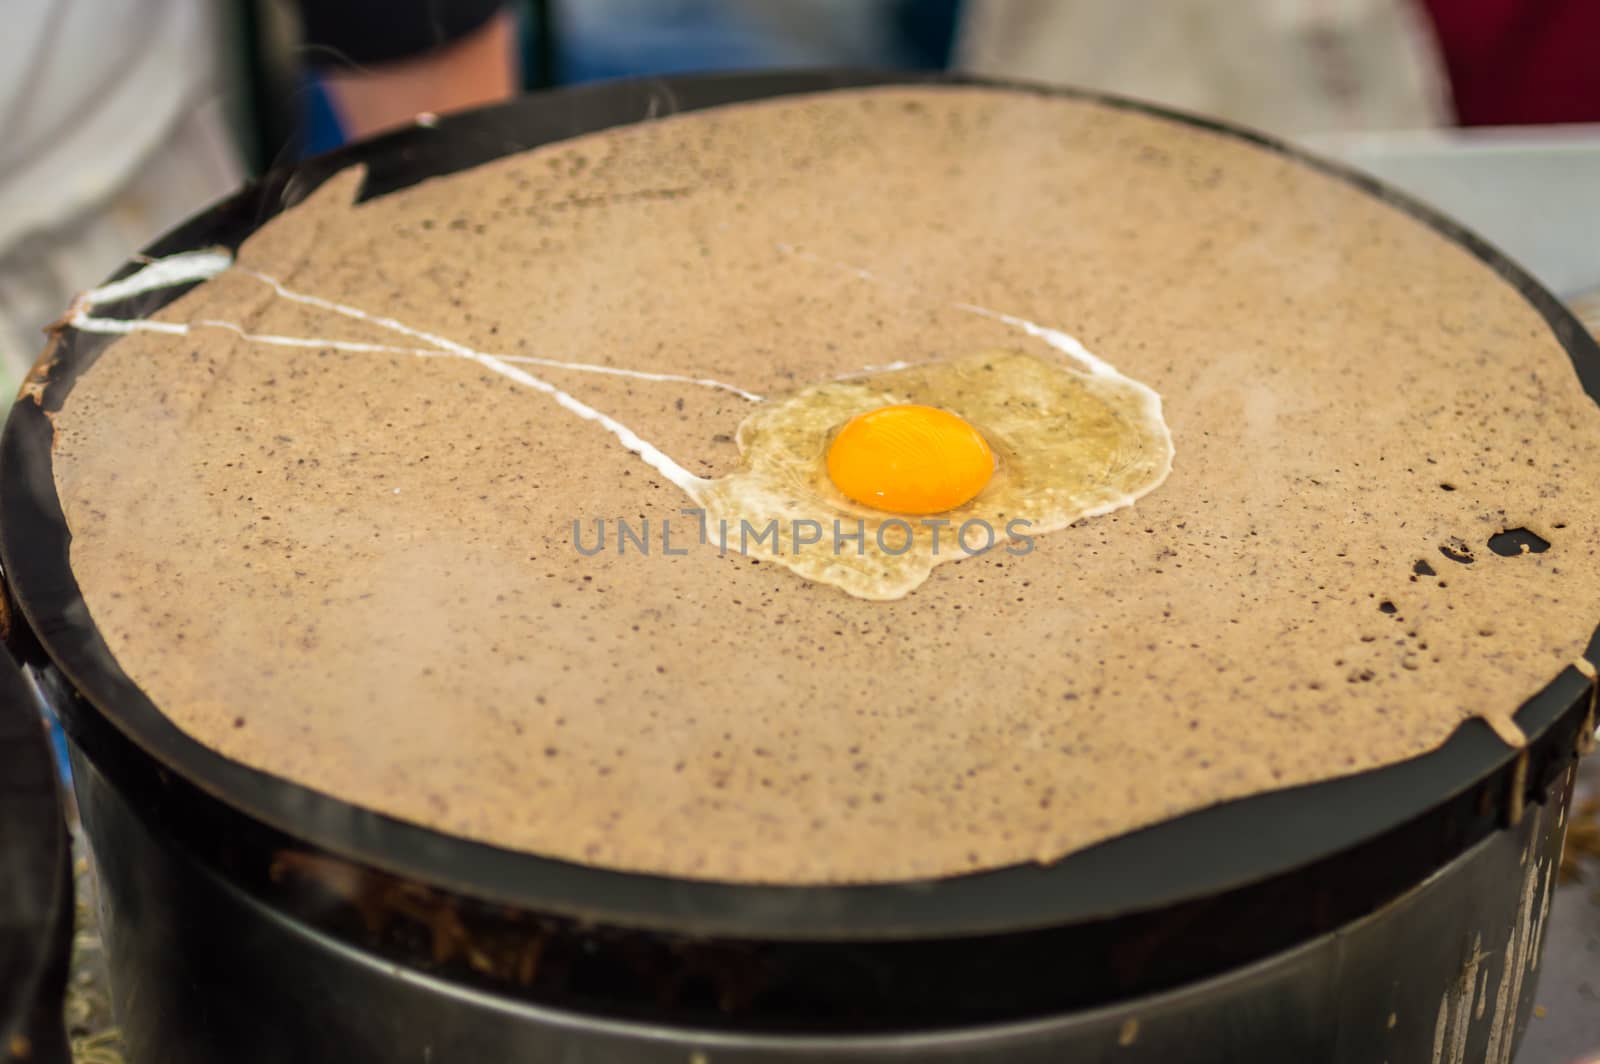 Raw egg on pancakes during preparation in France